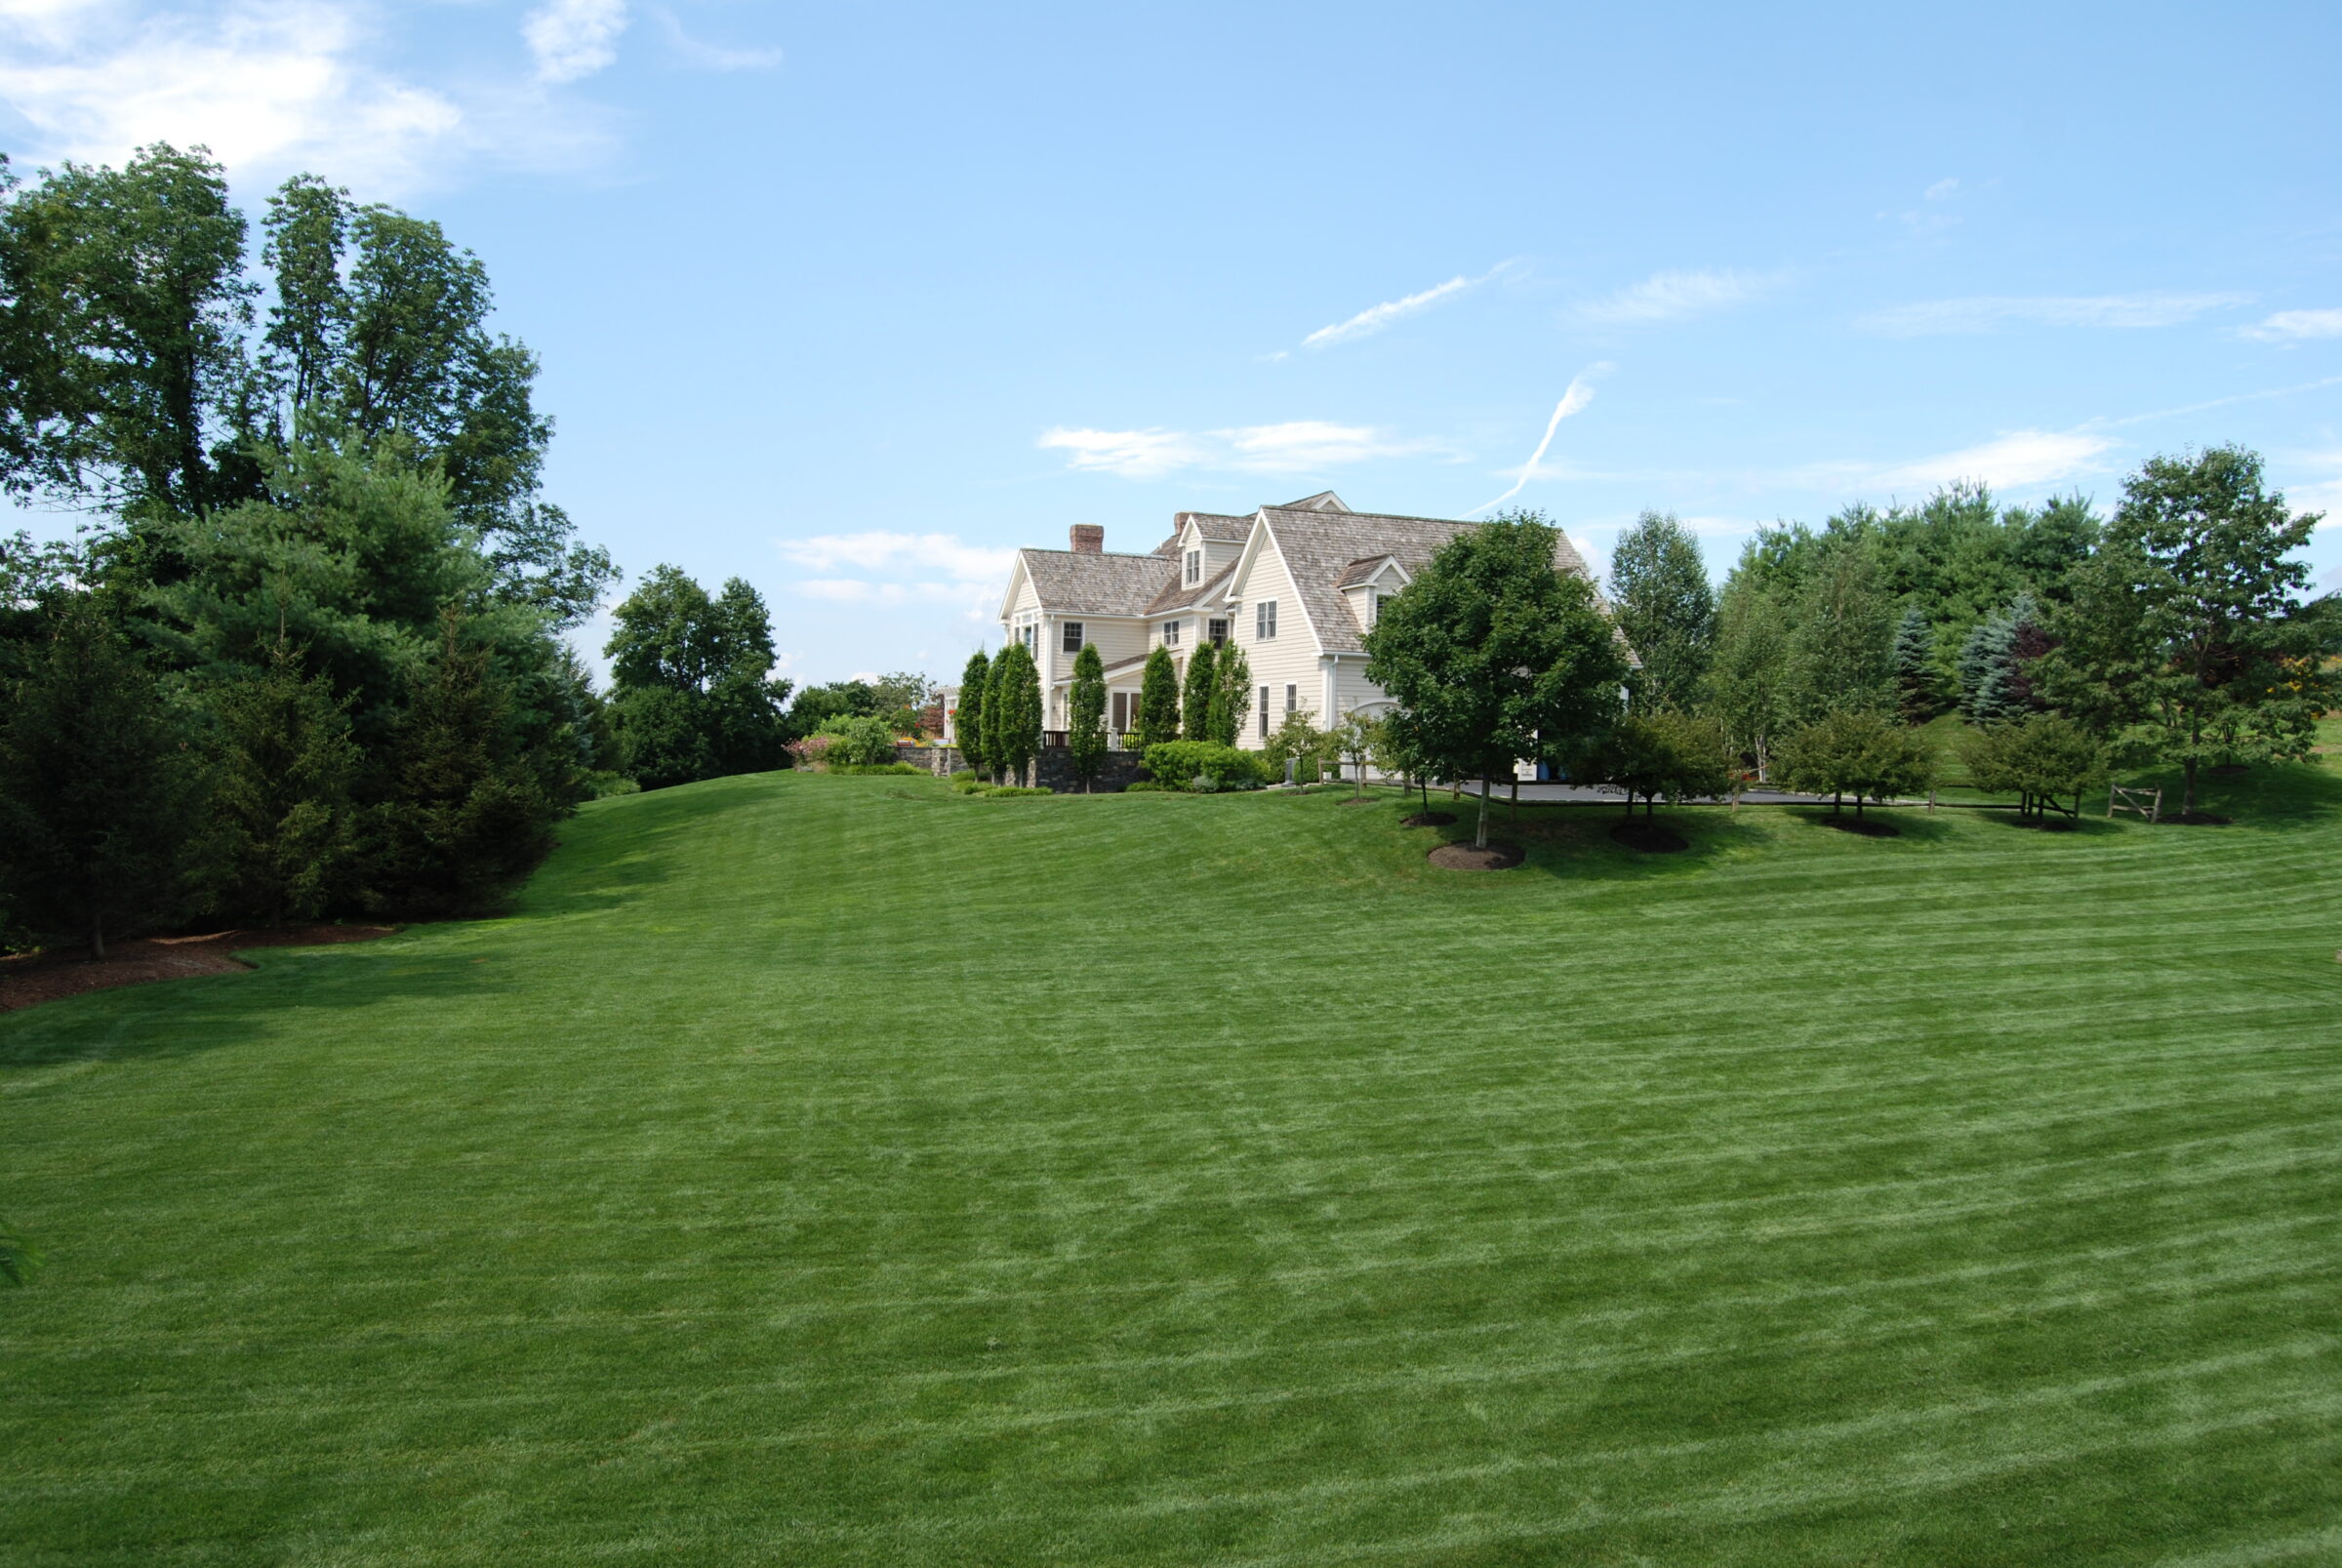 A large house with a grey roof is surrounded by lush, manicured lawns, trees, and shrubbery under a blue sky with wispy clouds.